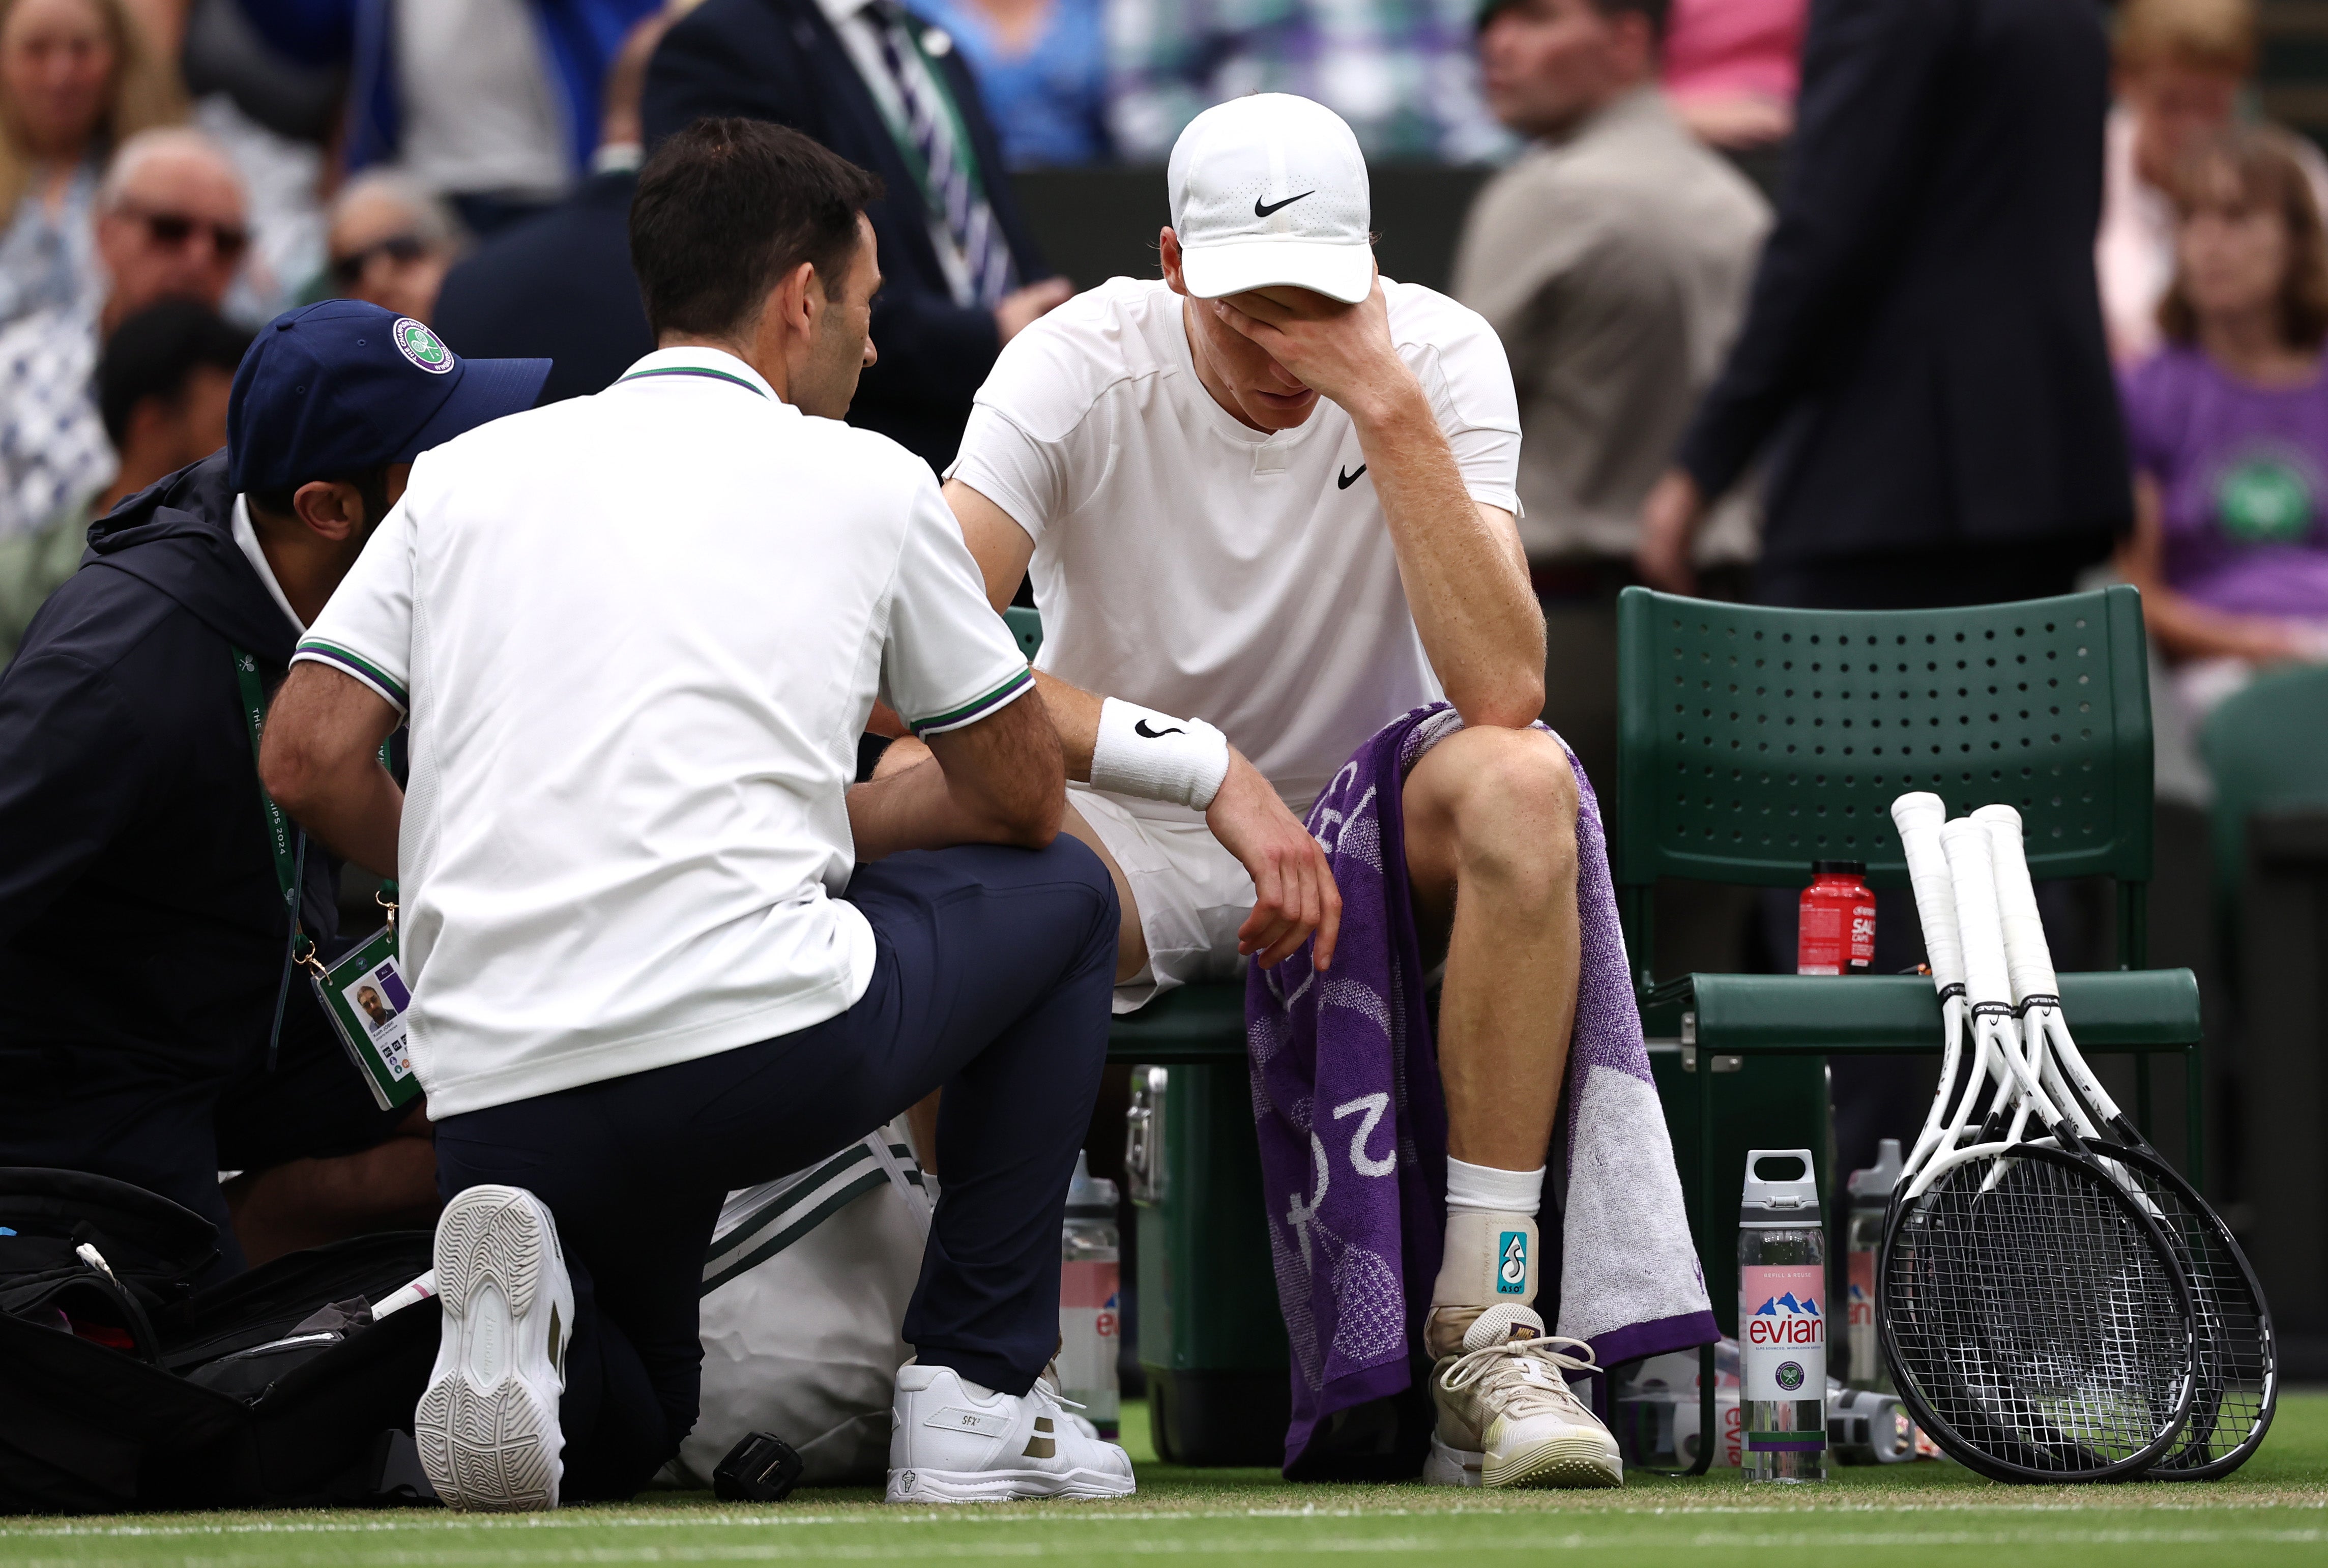 An unwell Jannik Sinner was knocked out of Wimbledon on Tuesday